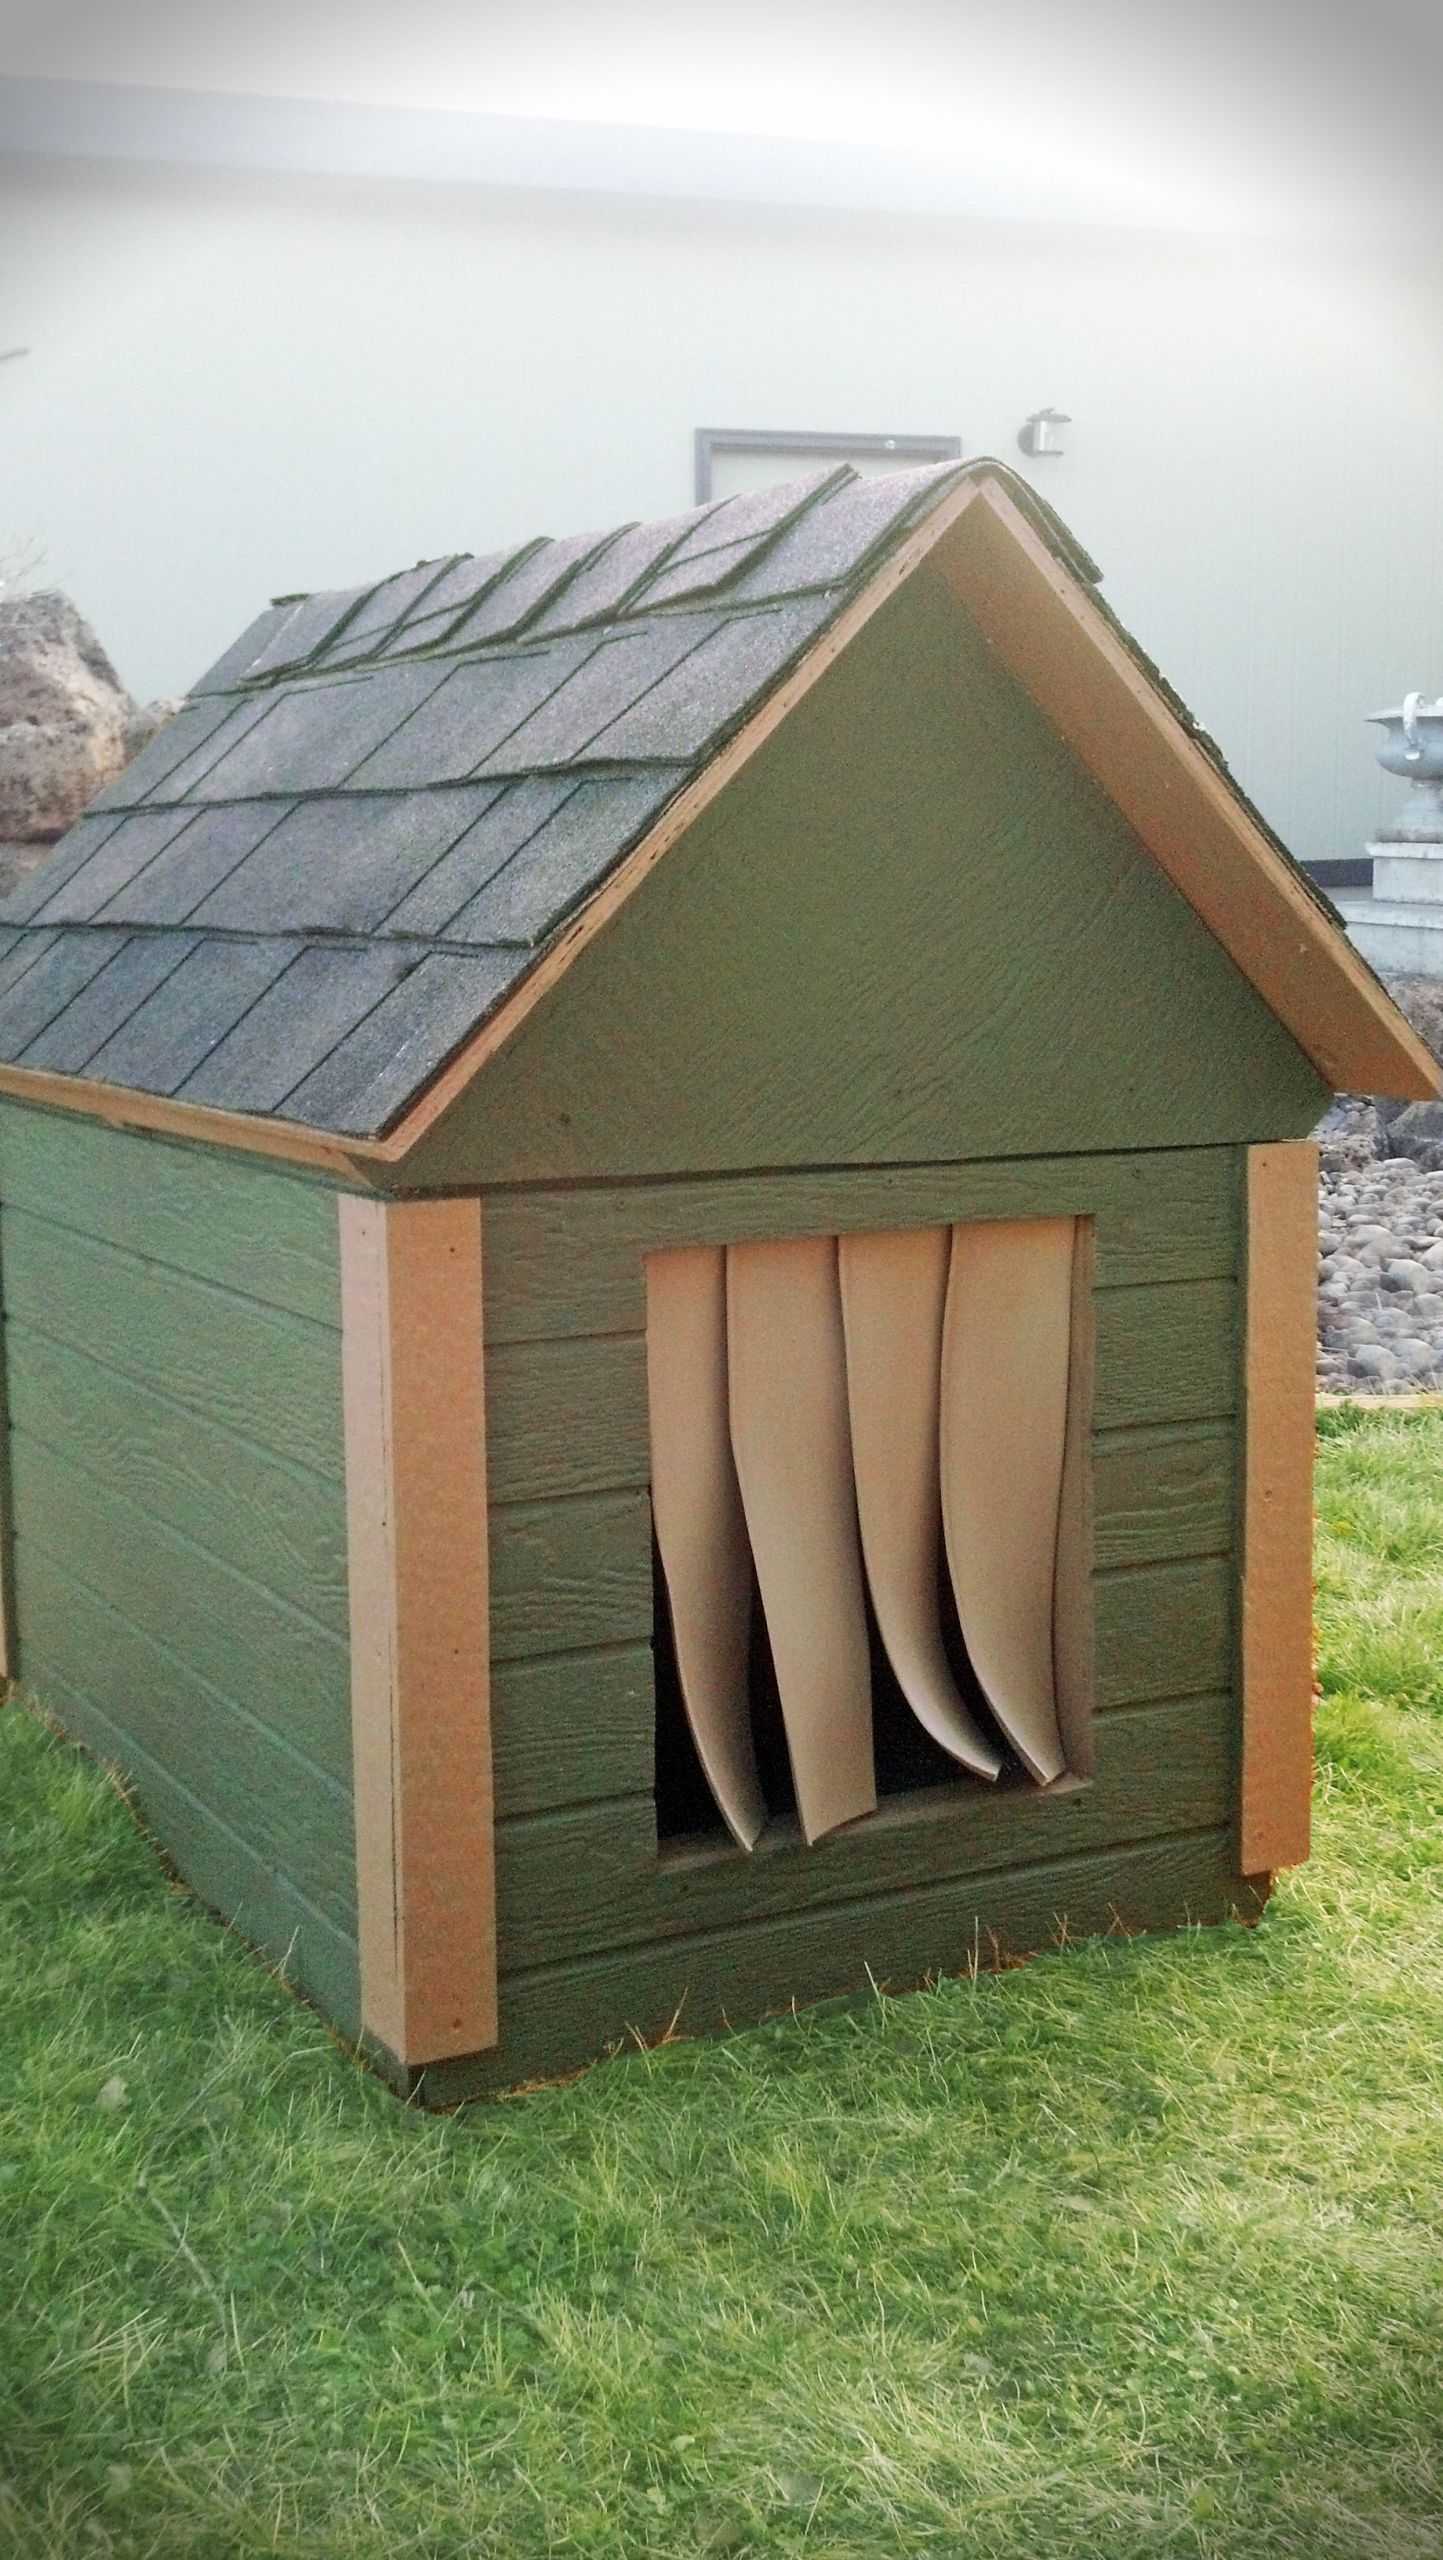 DIY Insulated Dog House
 Cozy insulated dog house to keep your best friend warm in